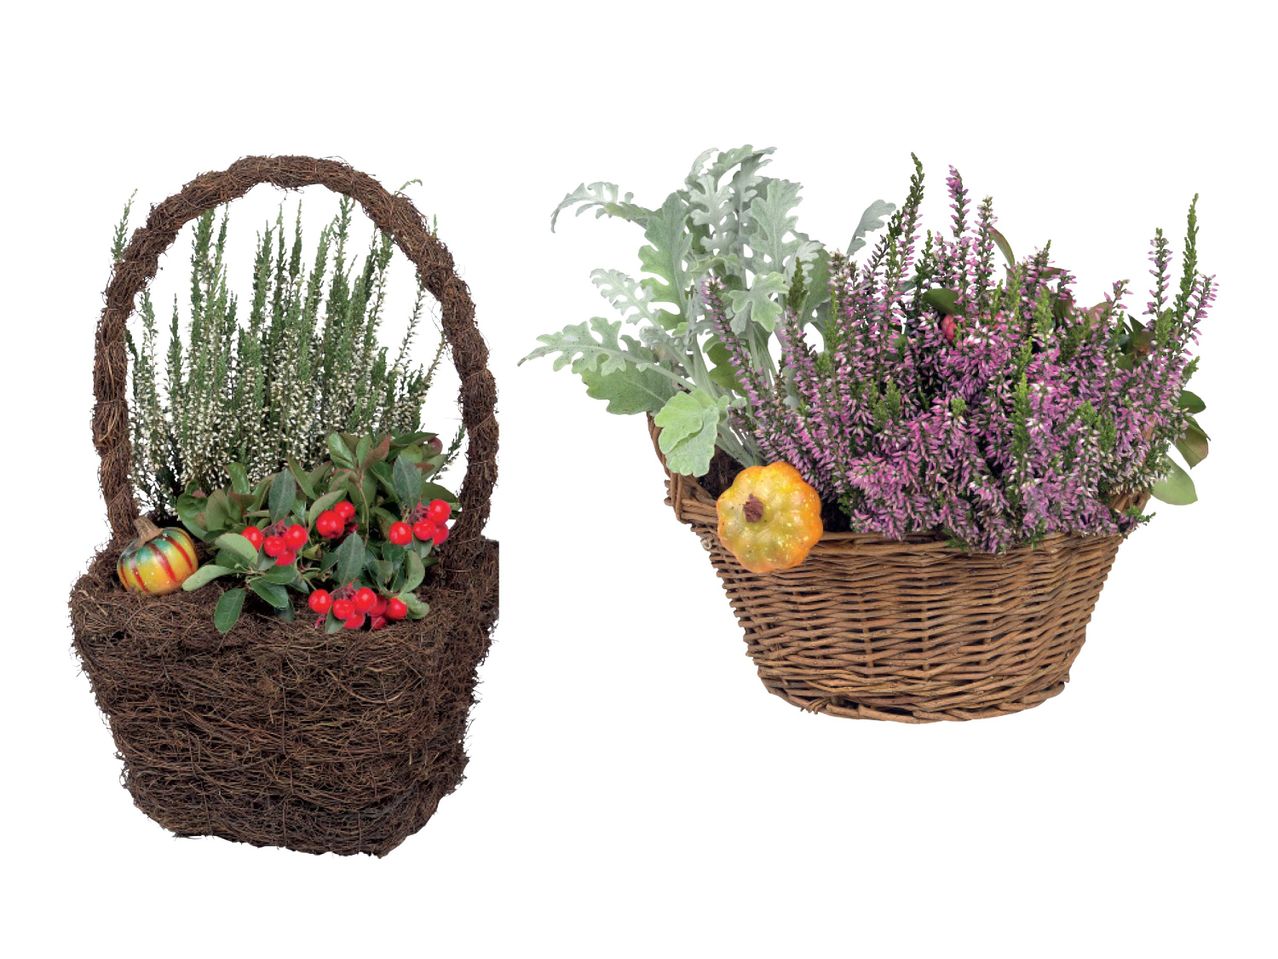 Go to full screen view: Autumn Basket - Image 1